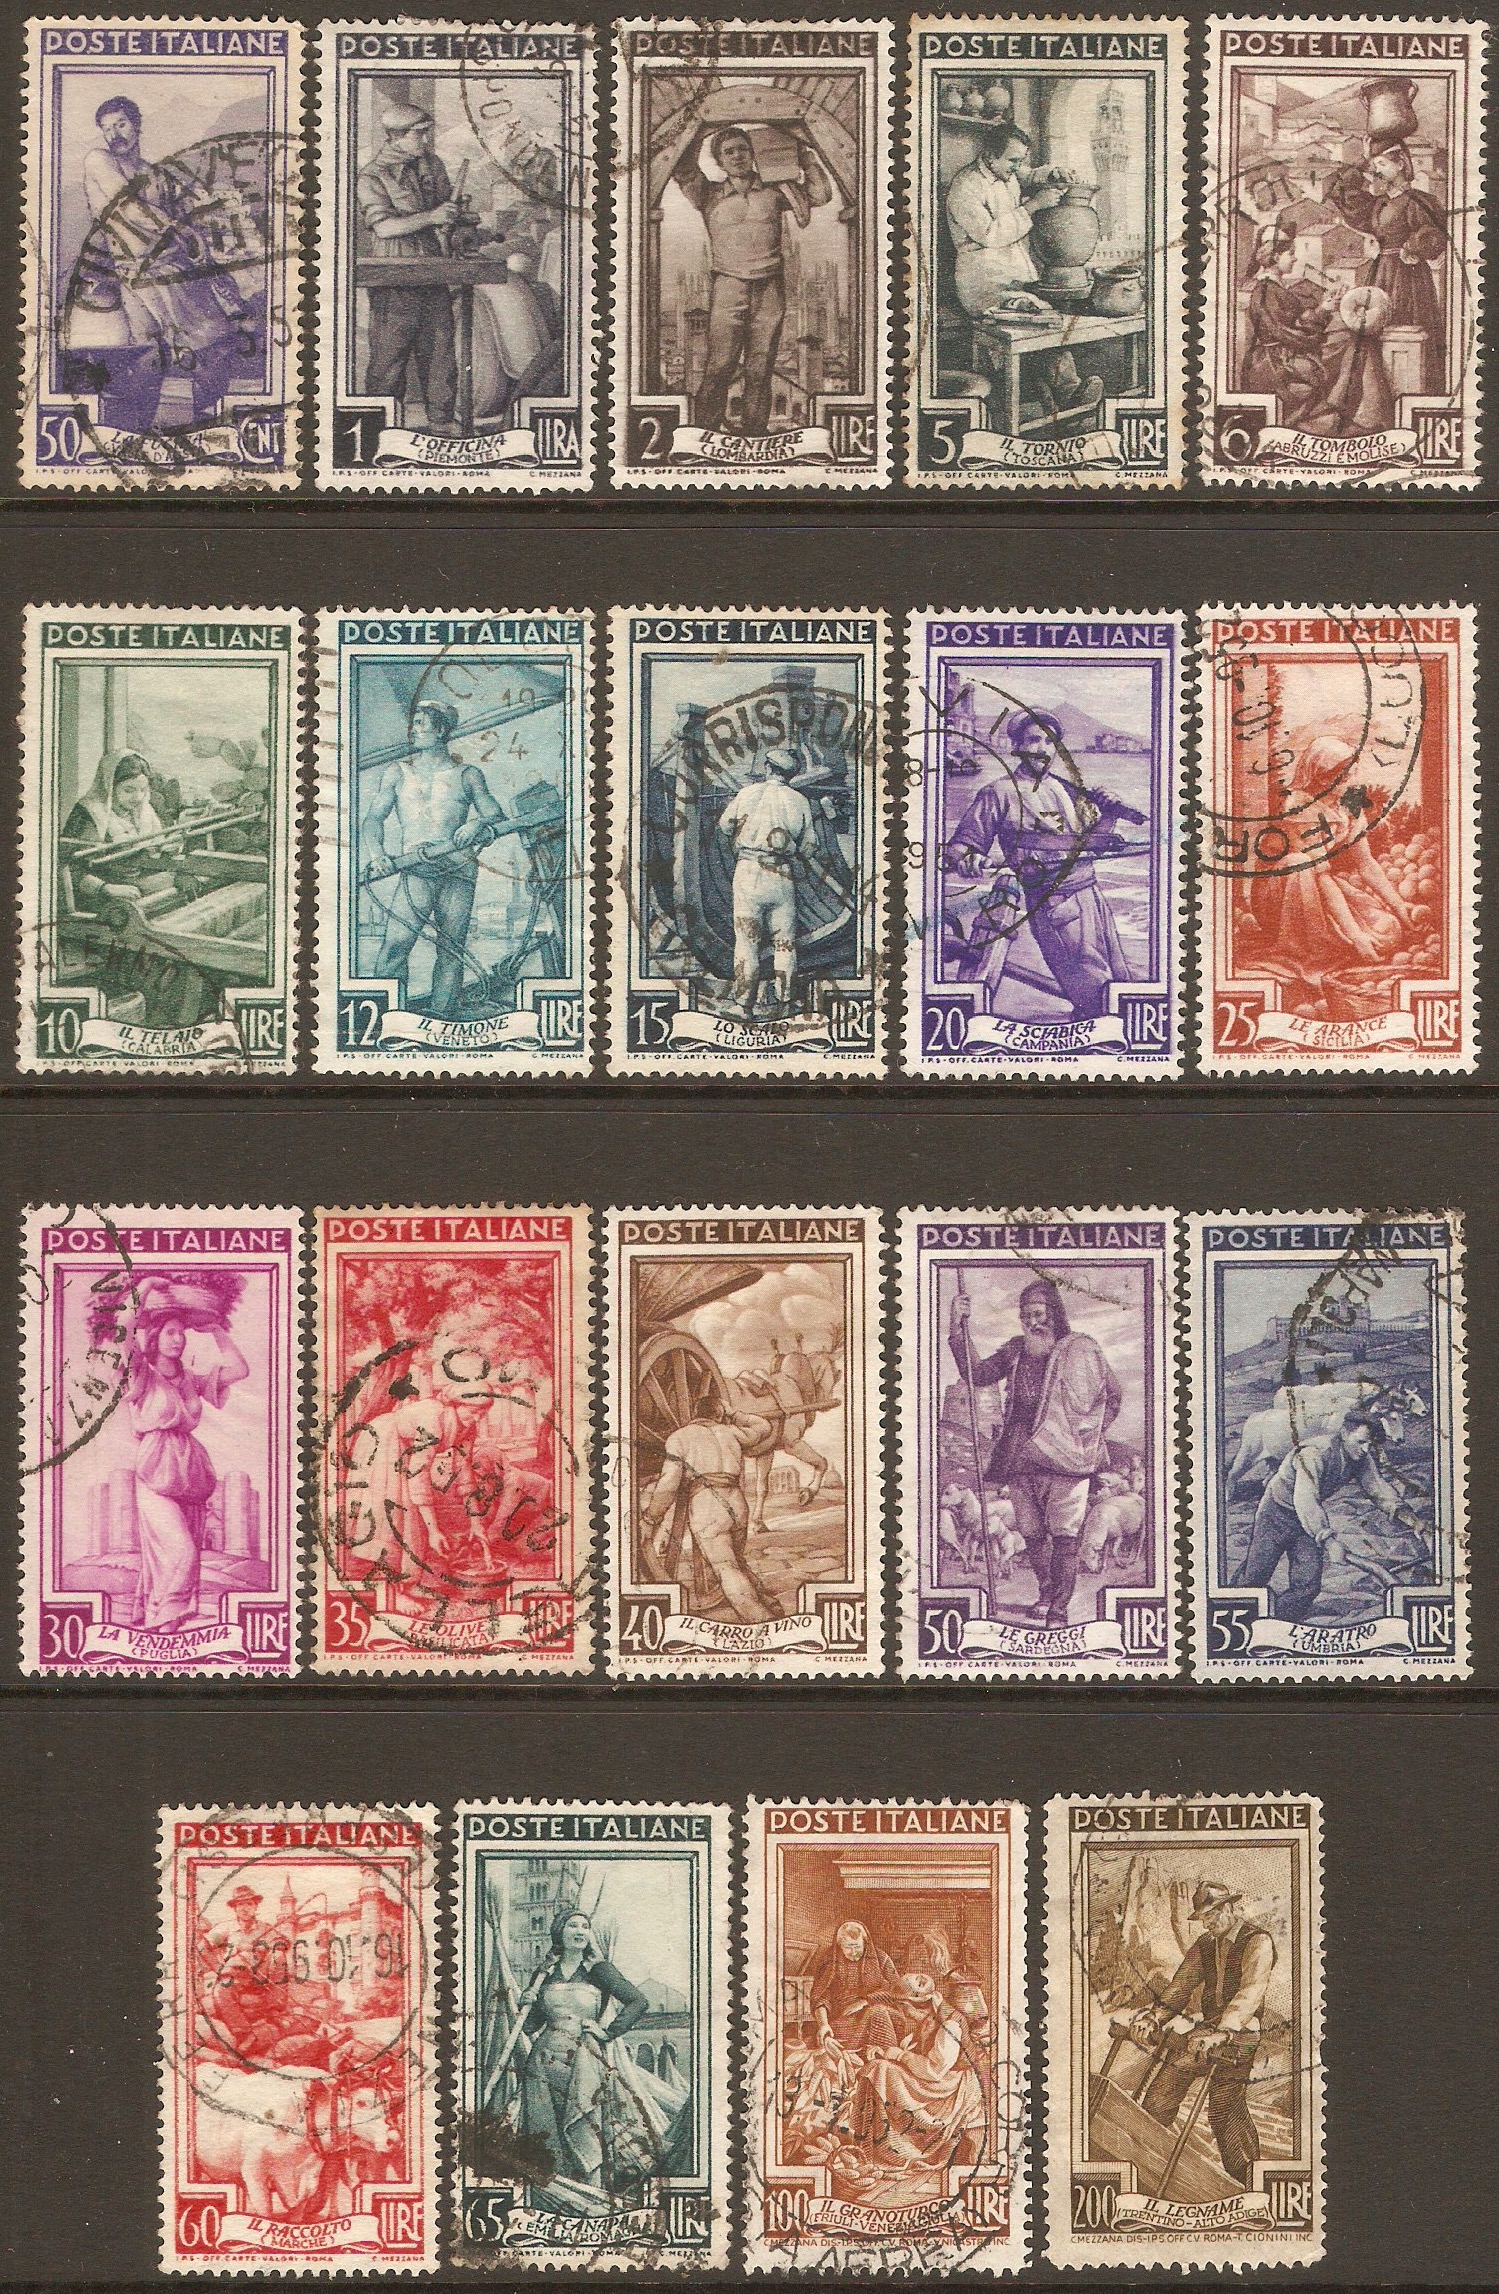 Italy 1950 Provincial Occupations Set. SG760-SG778.